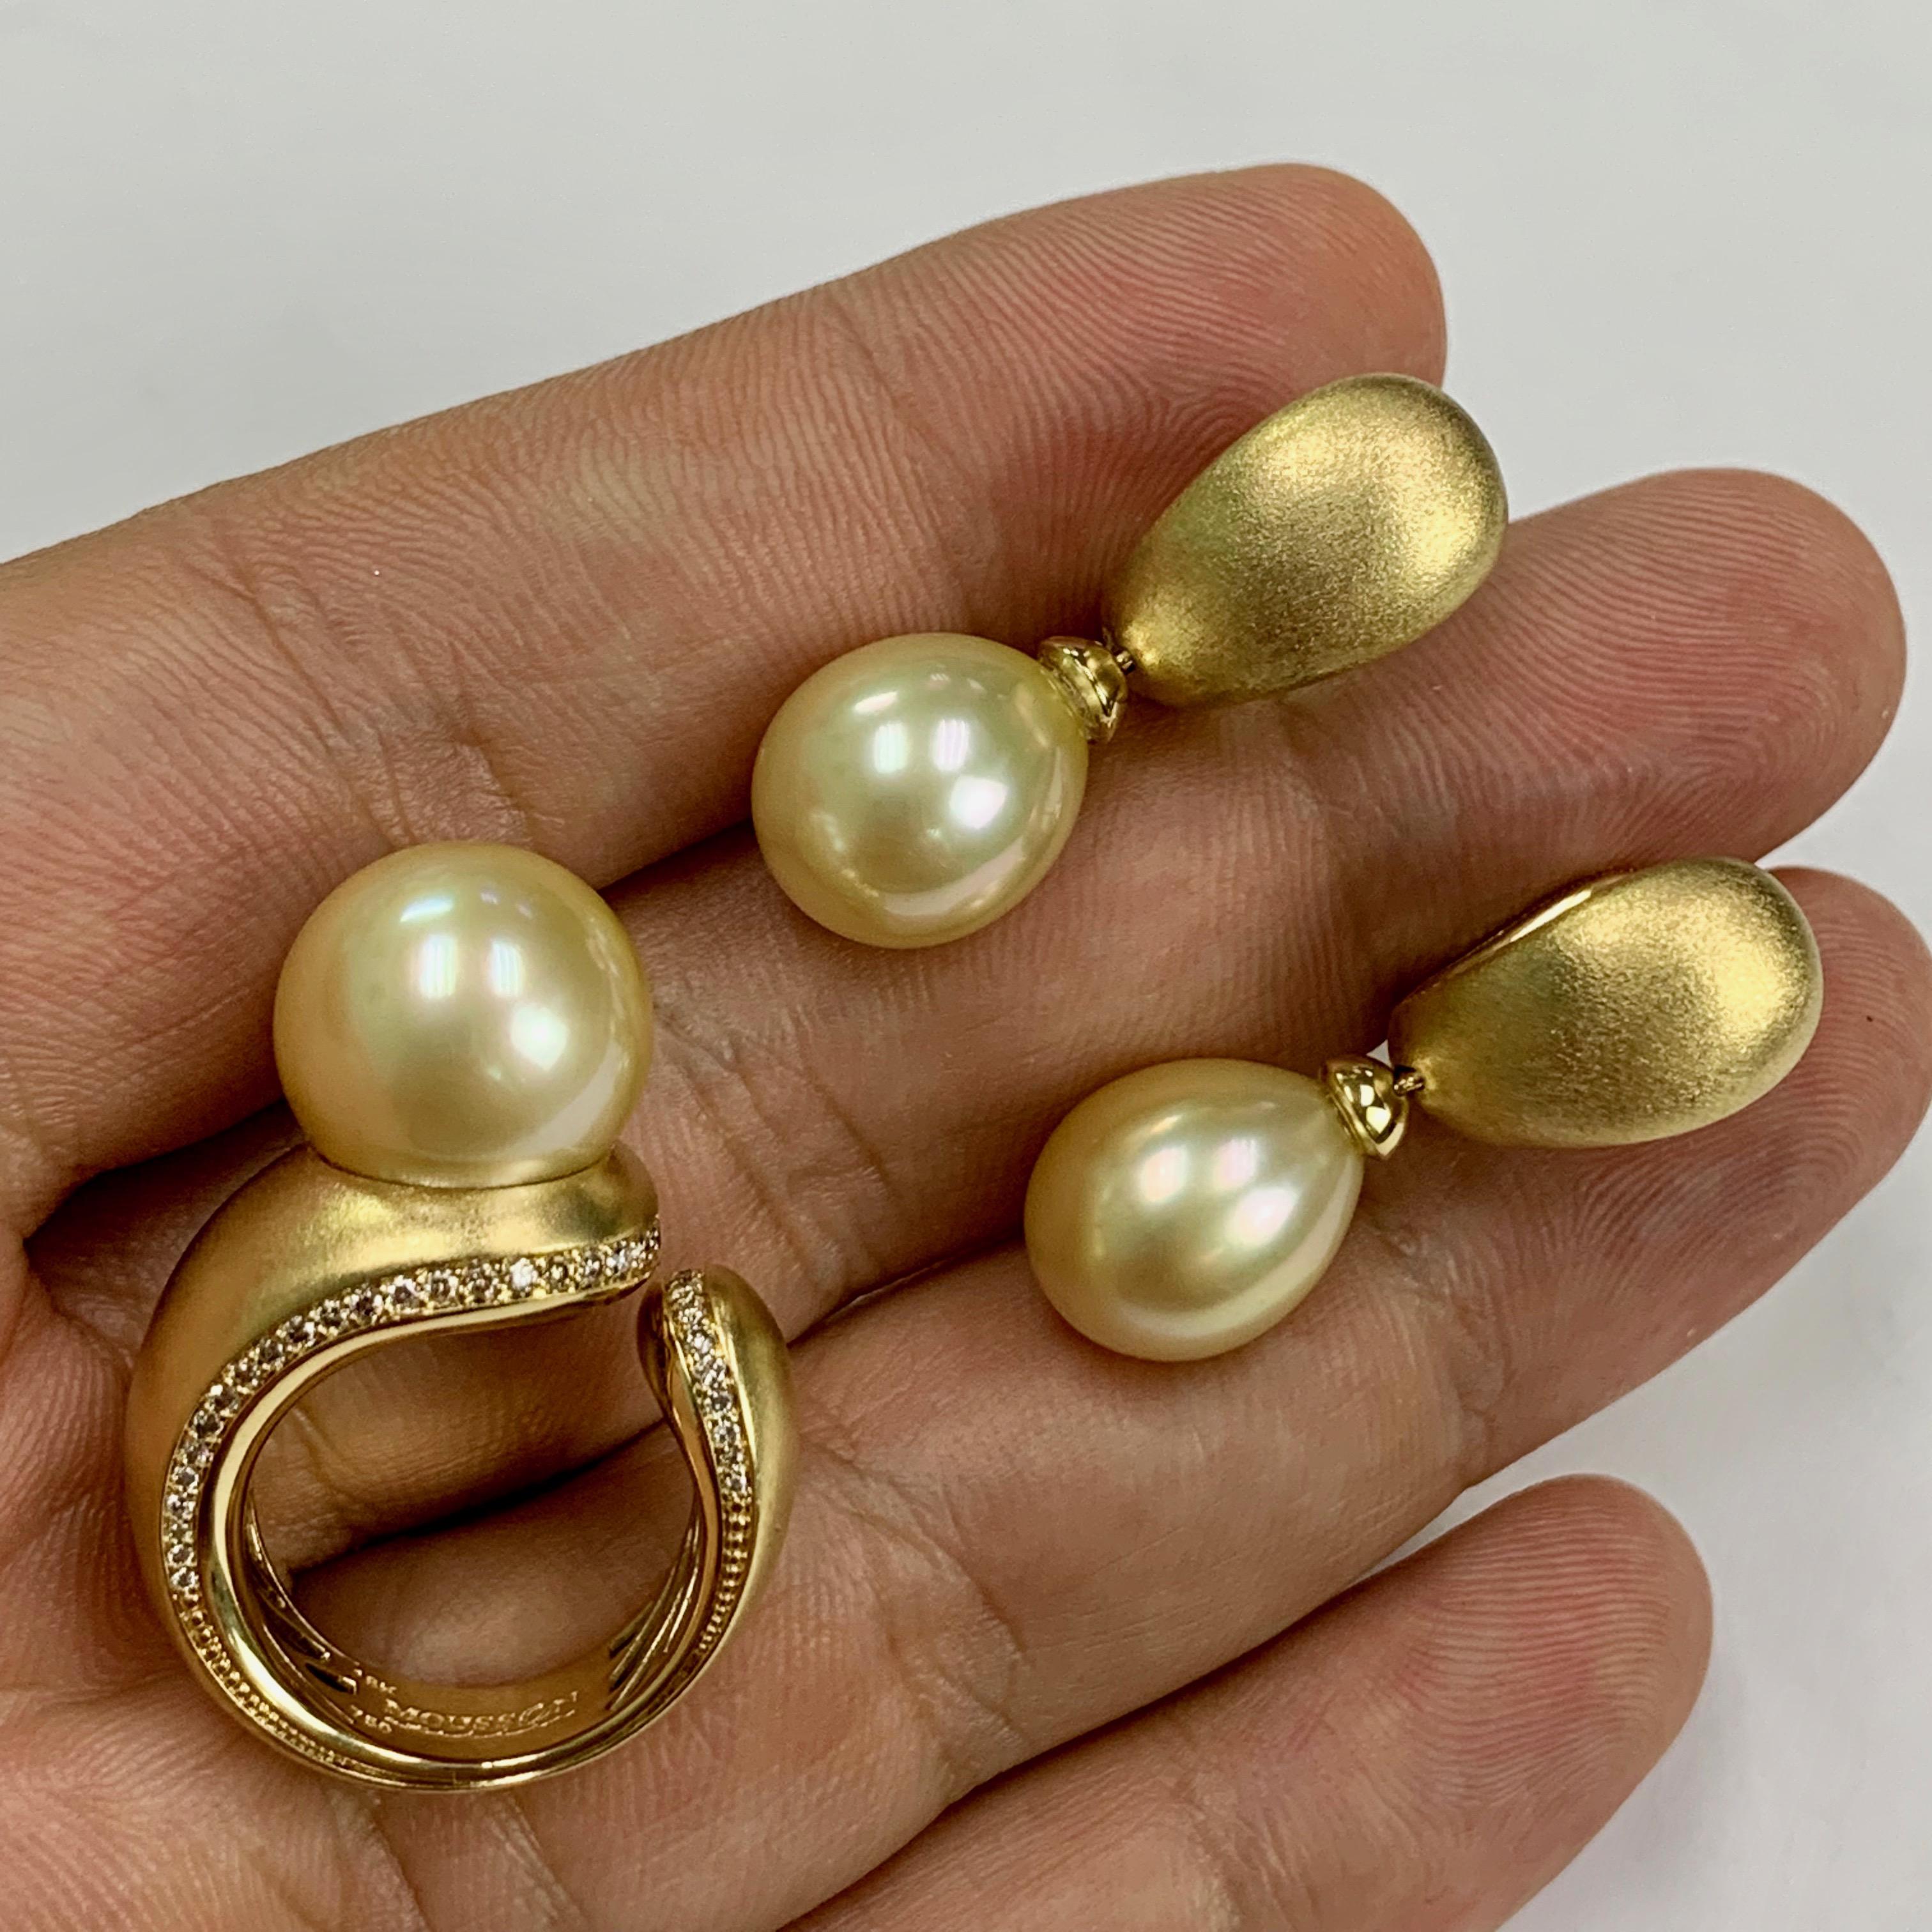 Golden South Sea Pearl Diamonds Dome Ring Earrings Suite
Very comfortable Set. Smooth design in combine with a smooth surface of a pearl gives perfect result. Brown diamonds carefully selected to support the pearl color. Pure triumph of